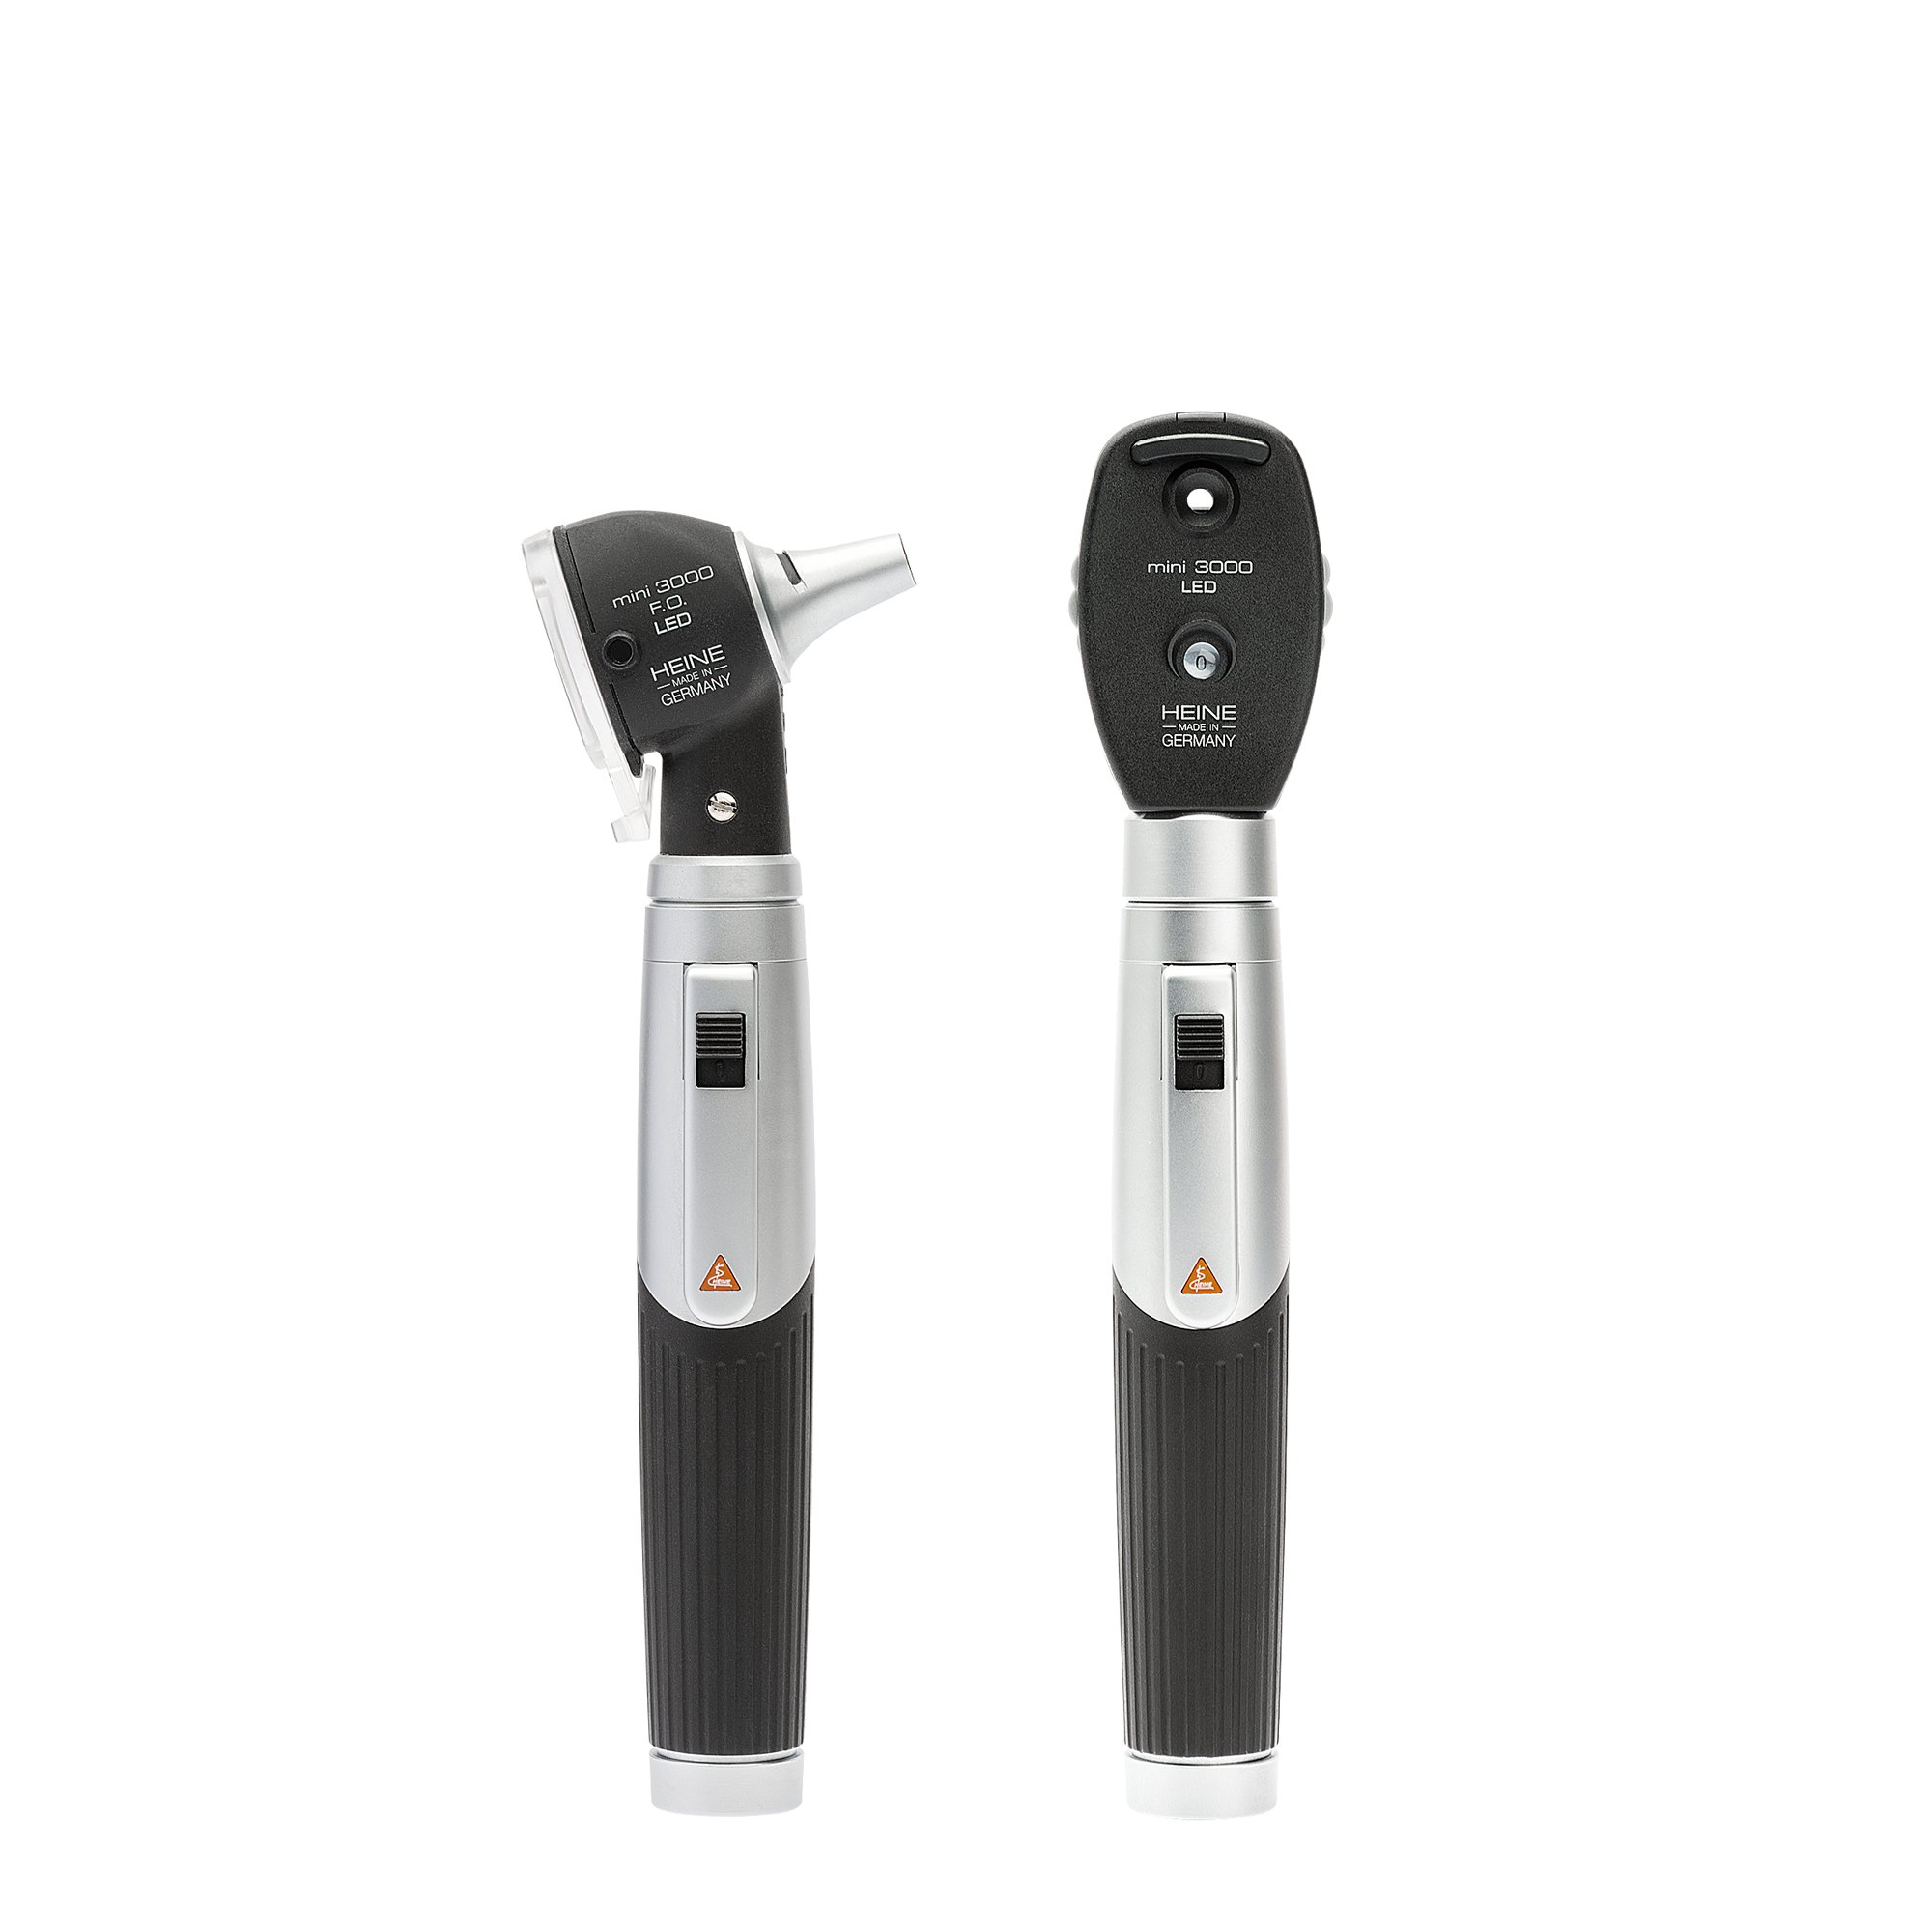 D-886.11.022-HEINE-mini3000-LED-otoscope-ophtalmoscope-set-rechargeable-handle-2